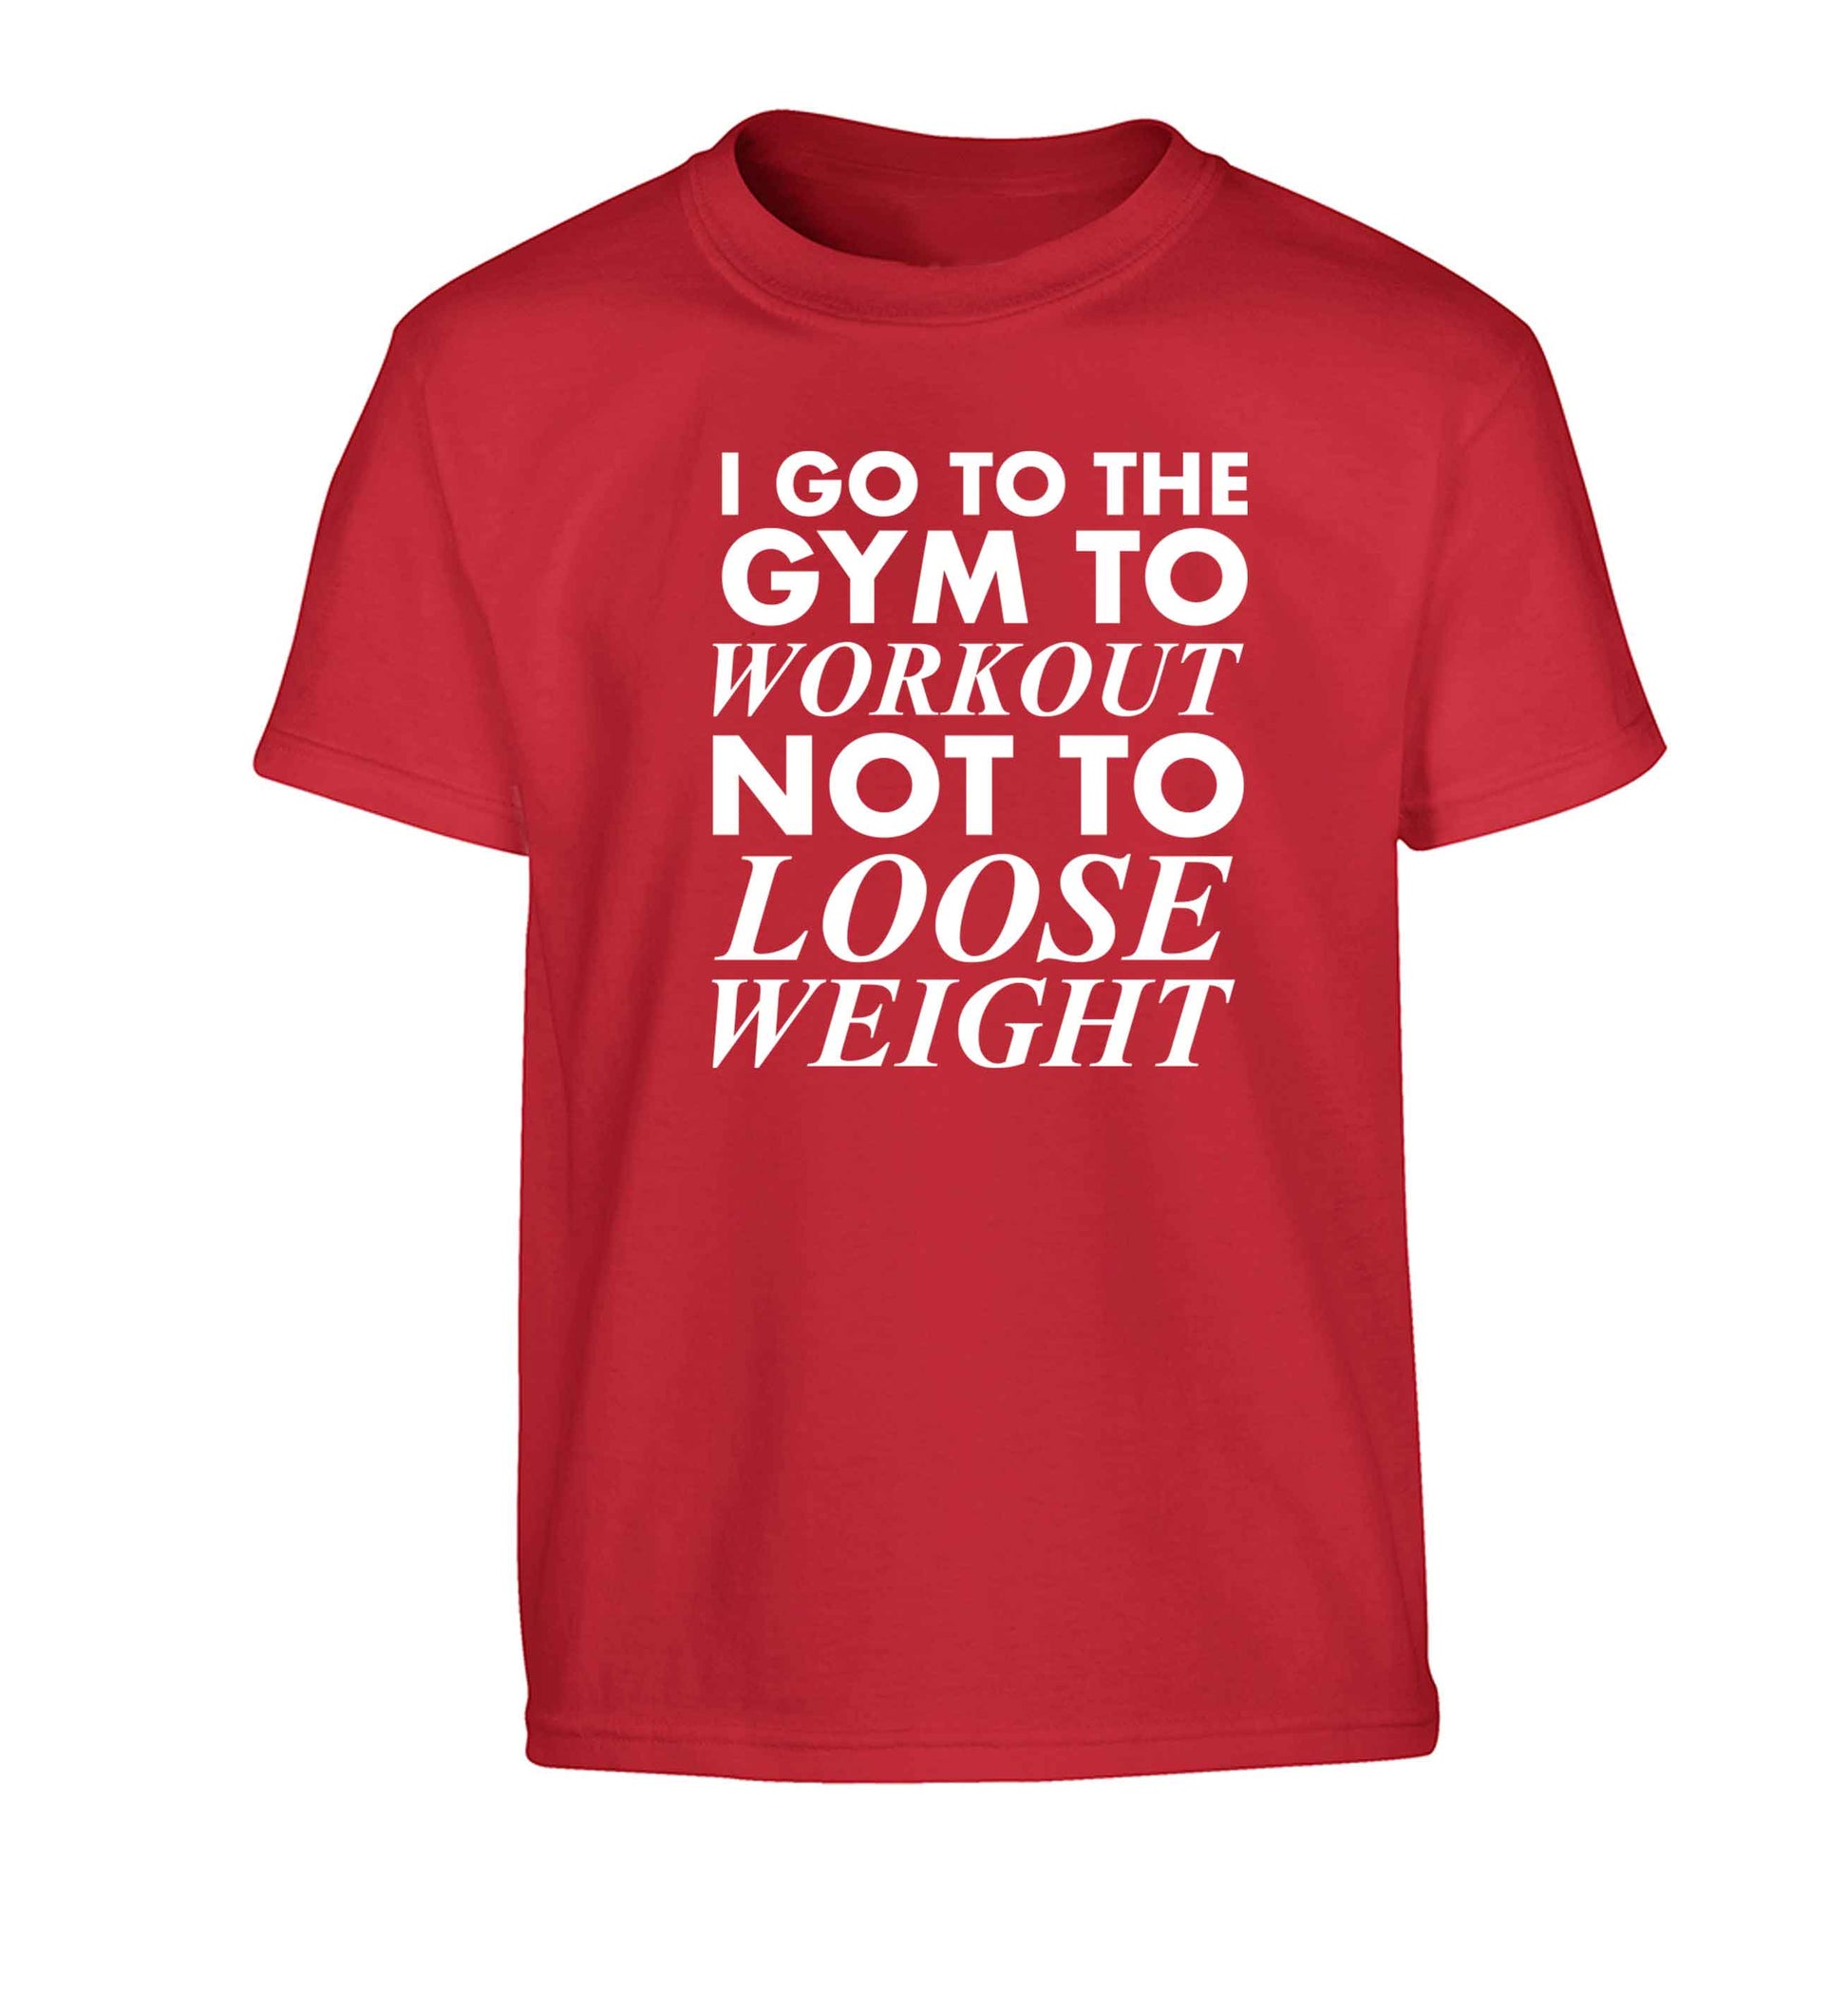 I go to the gym to workout not to loose weight Children's red Tshirt 12-13 Years